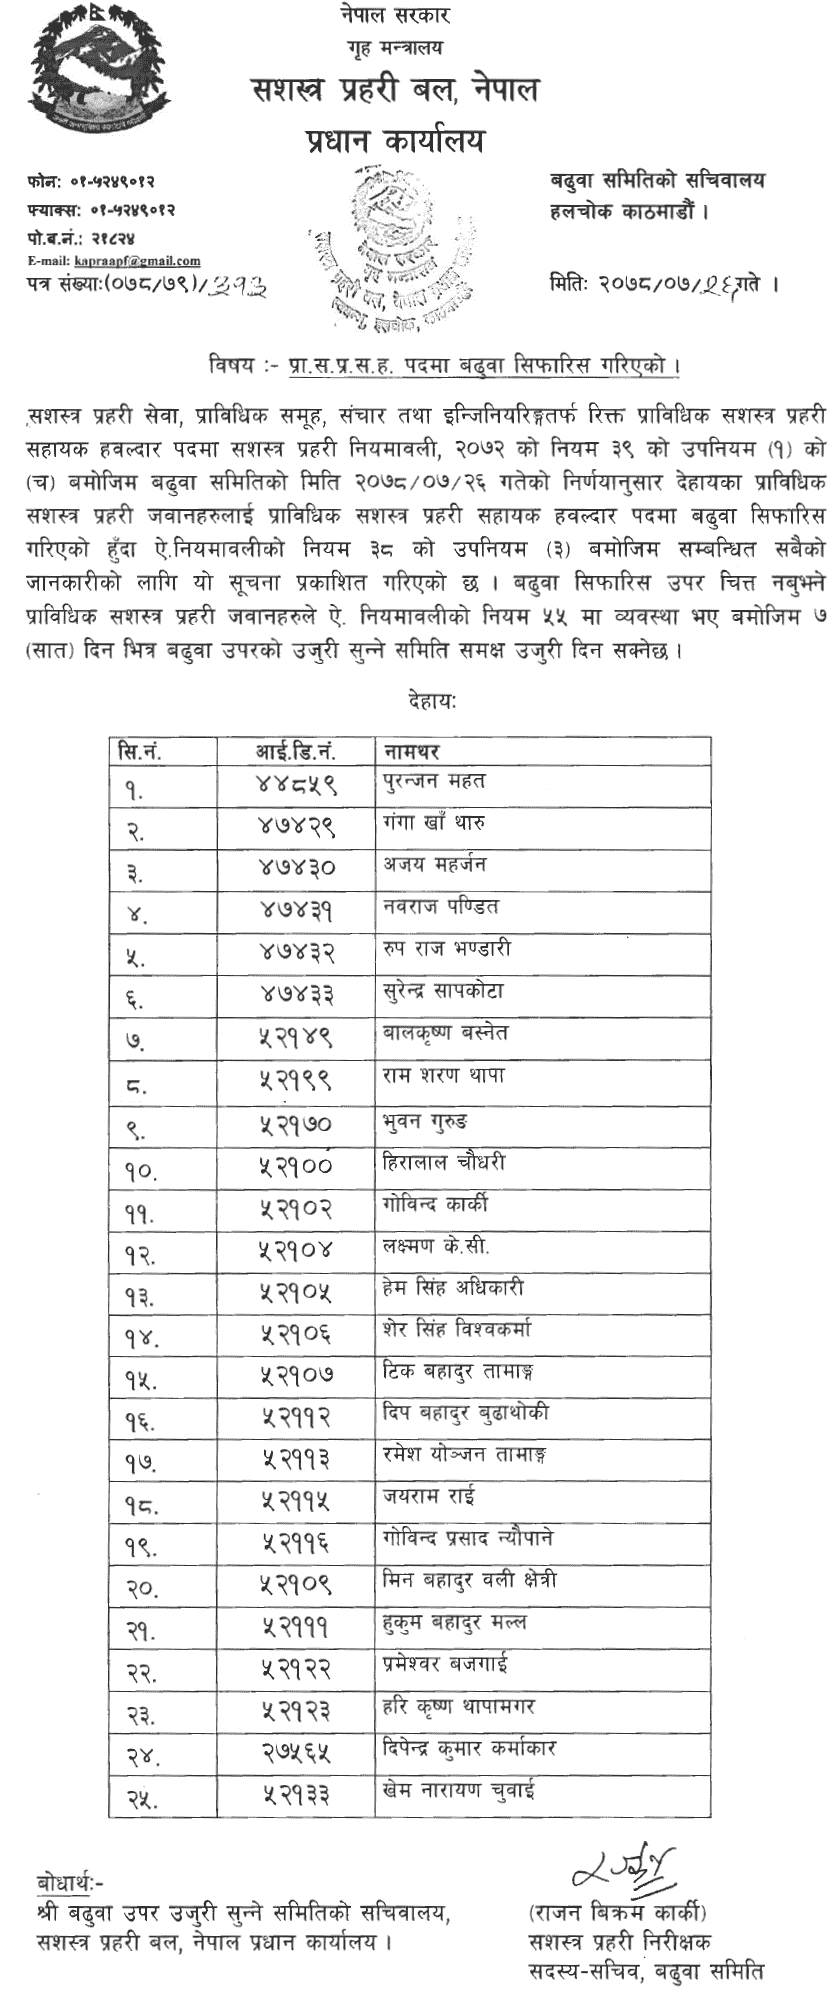 APF Nepal Published Promotion List of Assistant Constable (Sahayak Hawaldar)